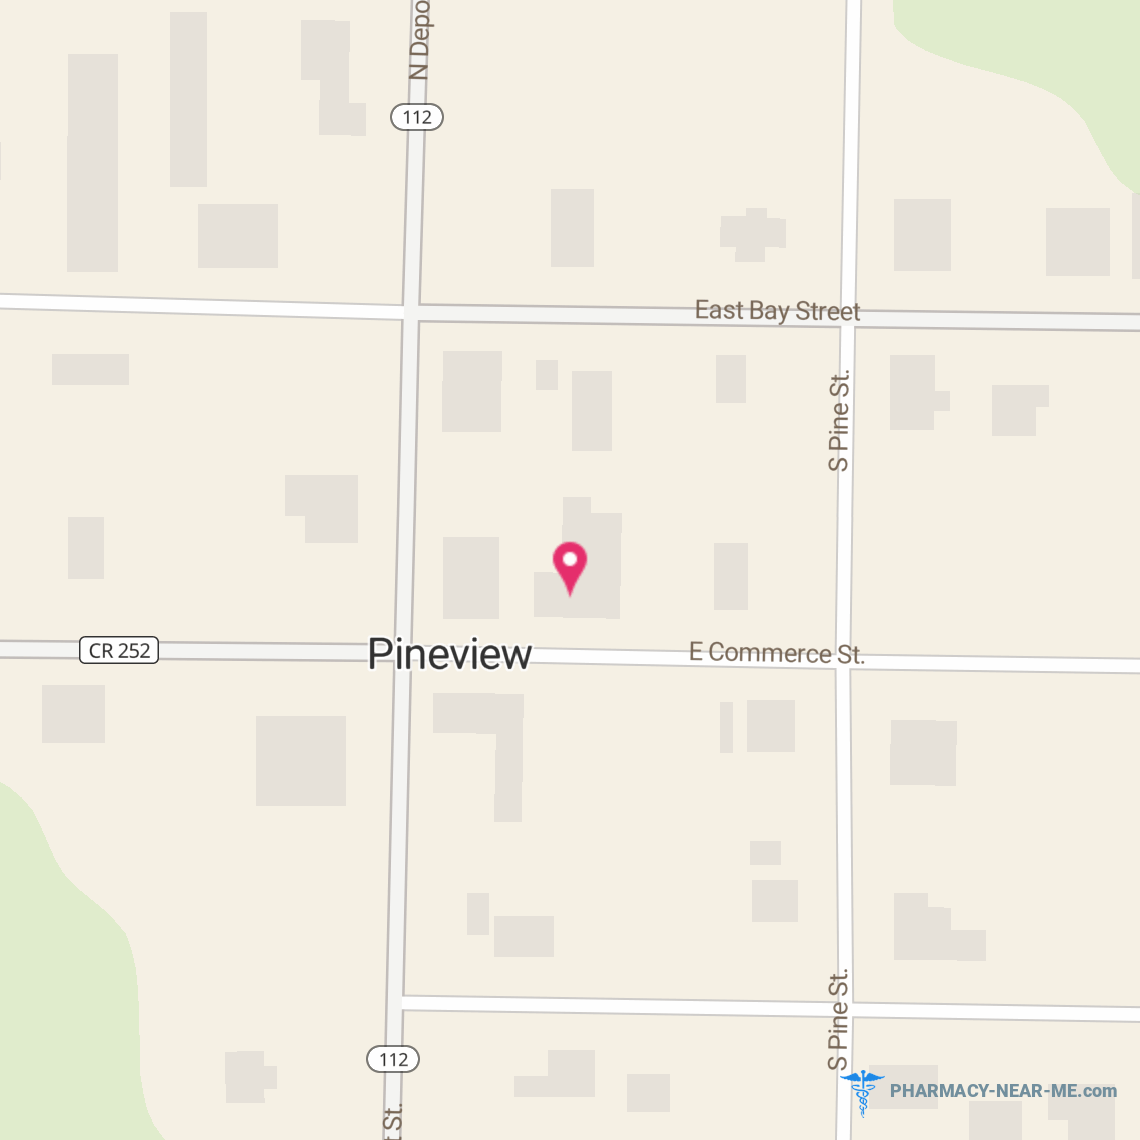 PINEVIEW PHARMACY INC - Pharmacy Hours, Phone, Reviews & Information: 117 East Commerce Street, Pineview, Georgia 31071, United States